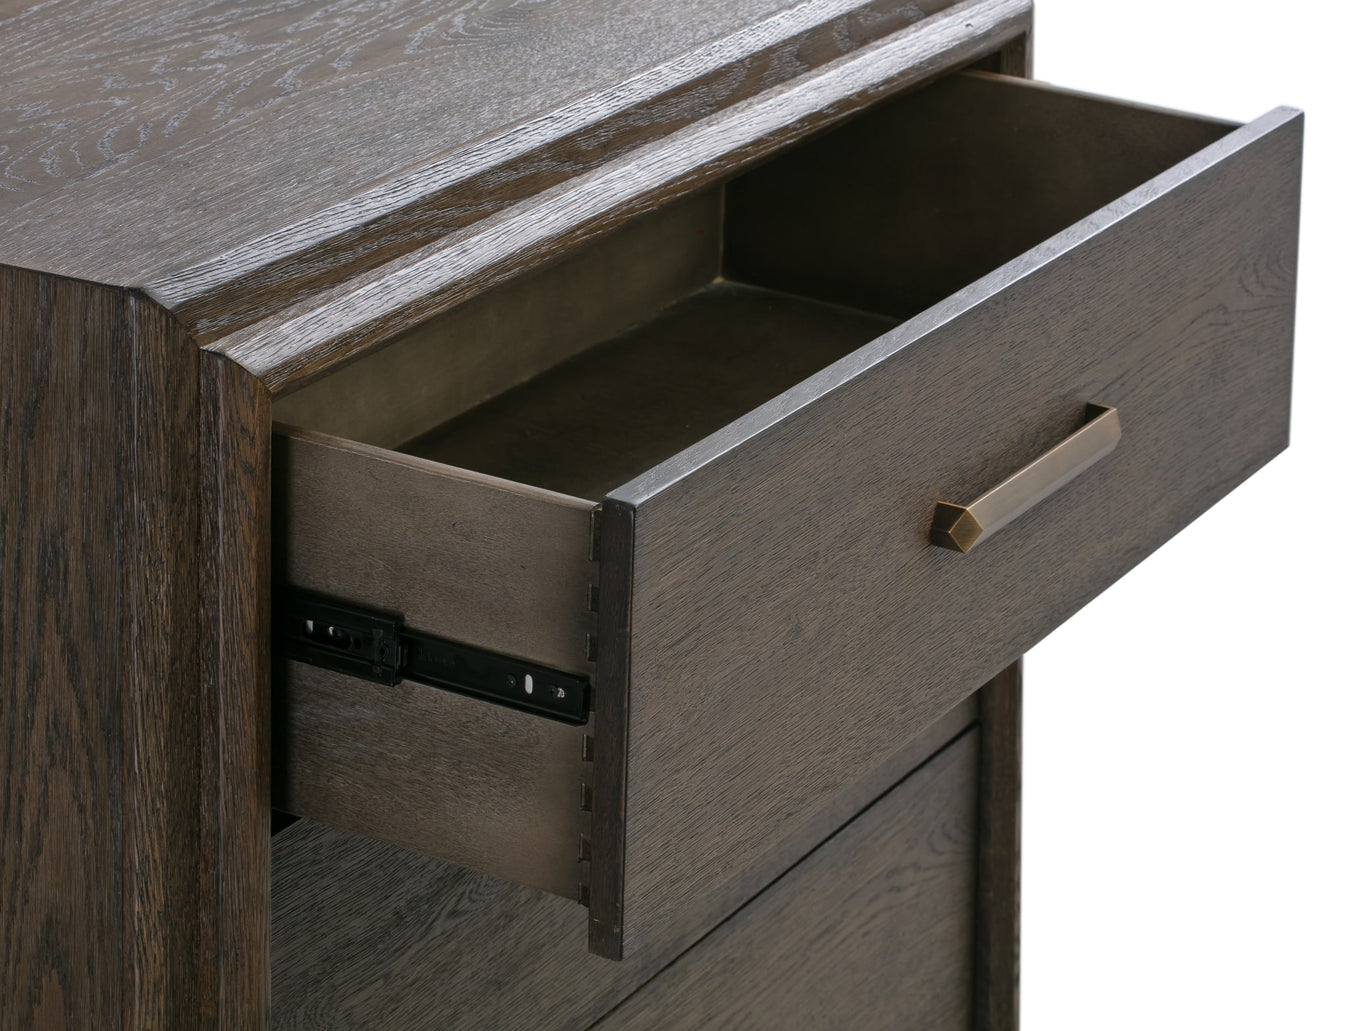 Lawson Five Drawer Wood Chest